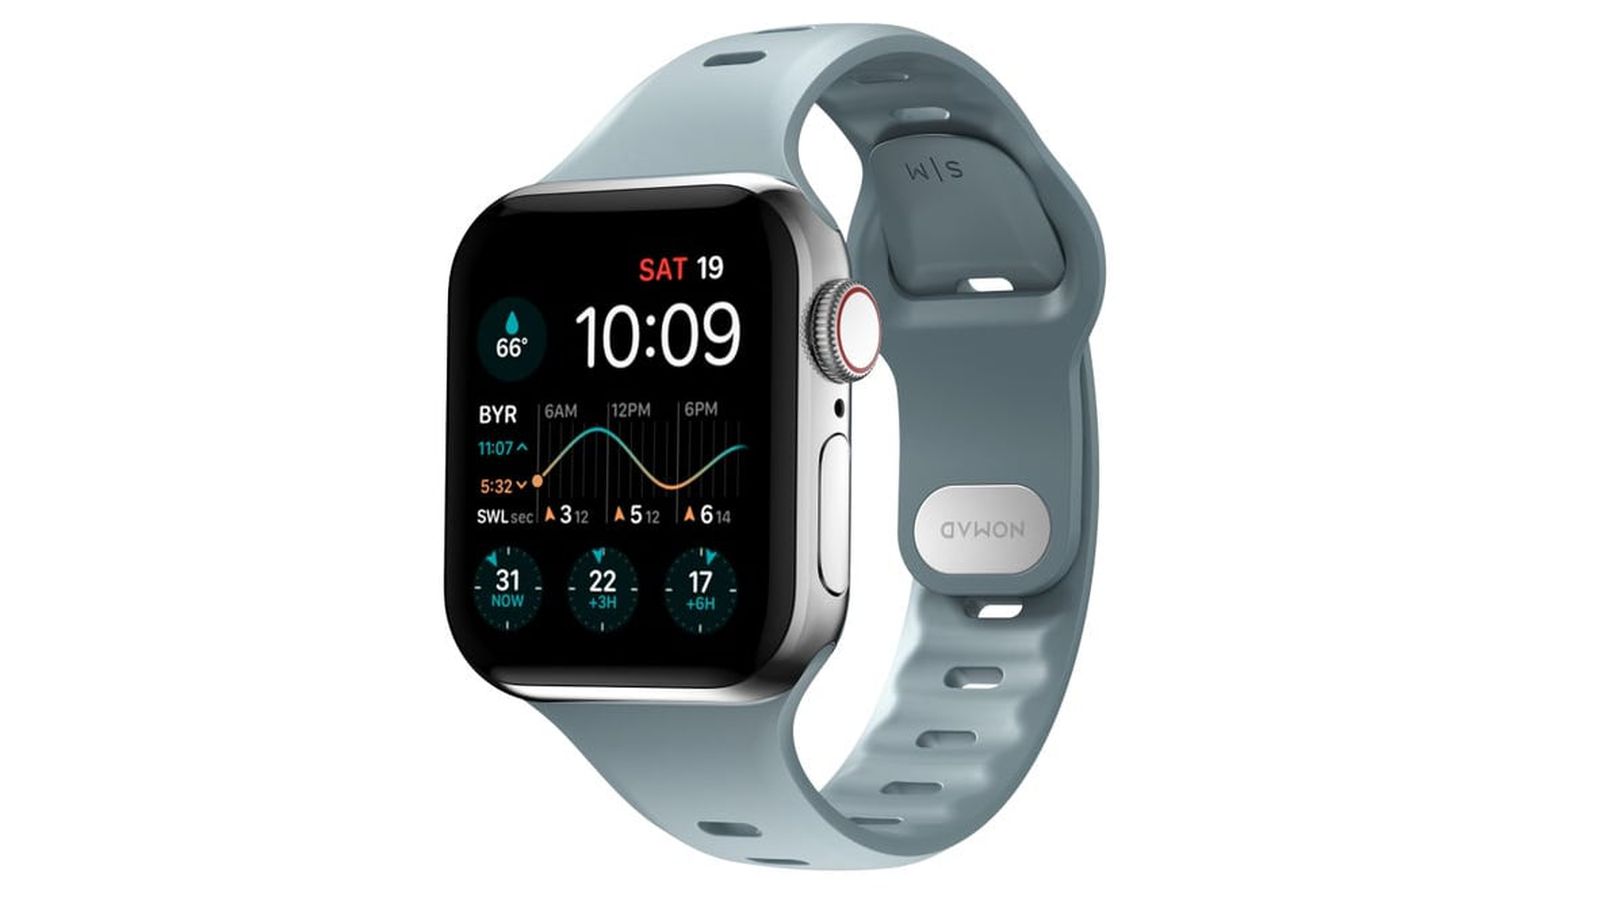 macrumors.com - Juli Clover - Nomad Launches New Sport Band Slim for Apple Watch